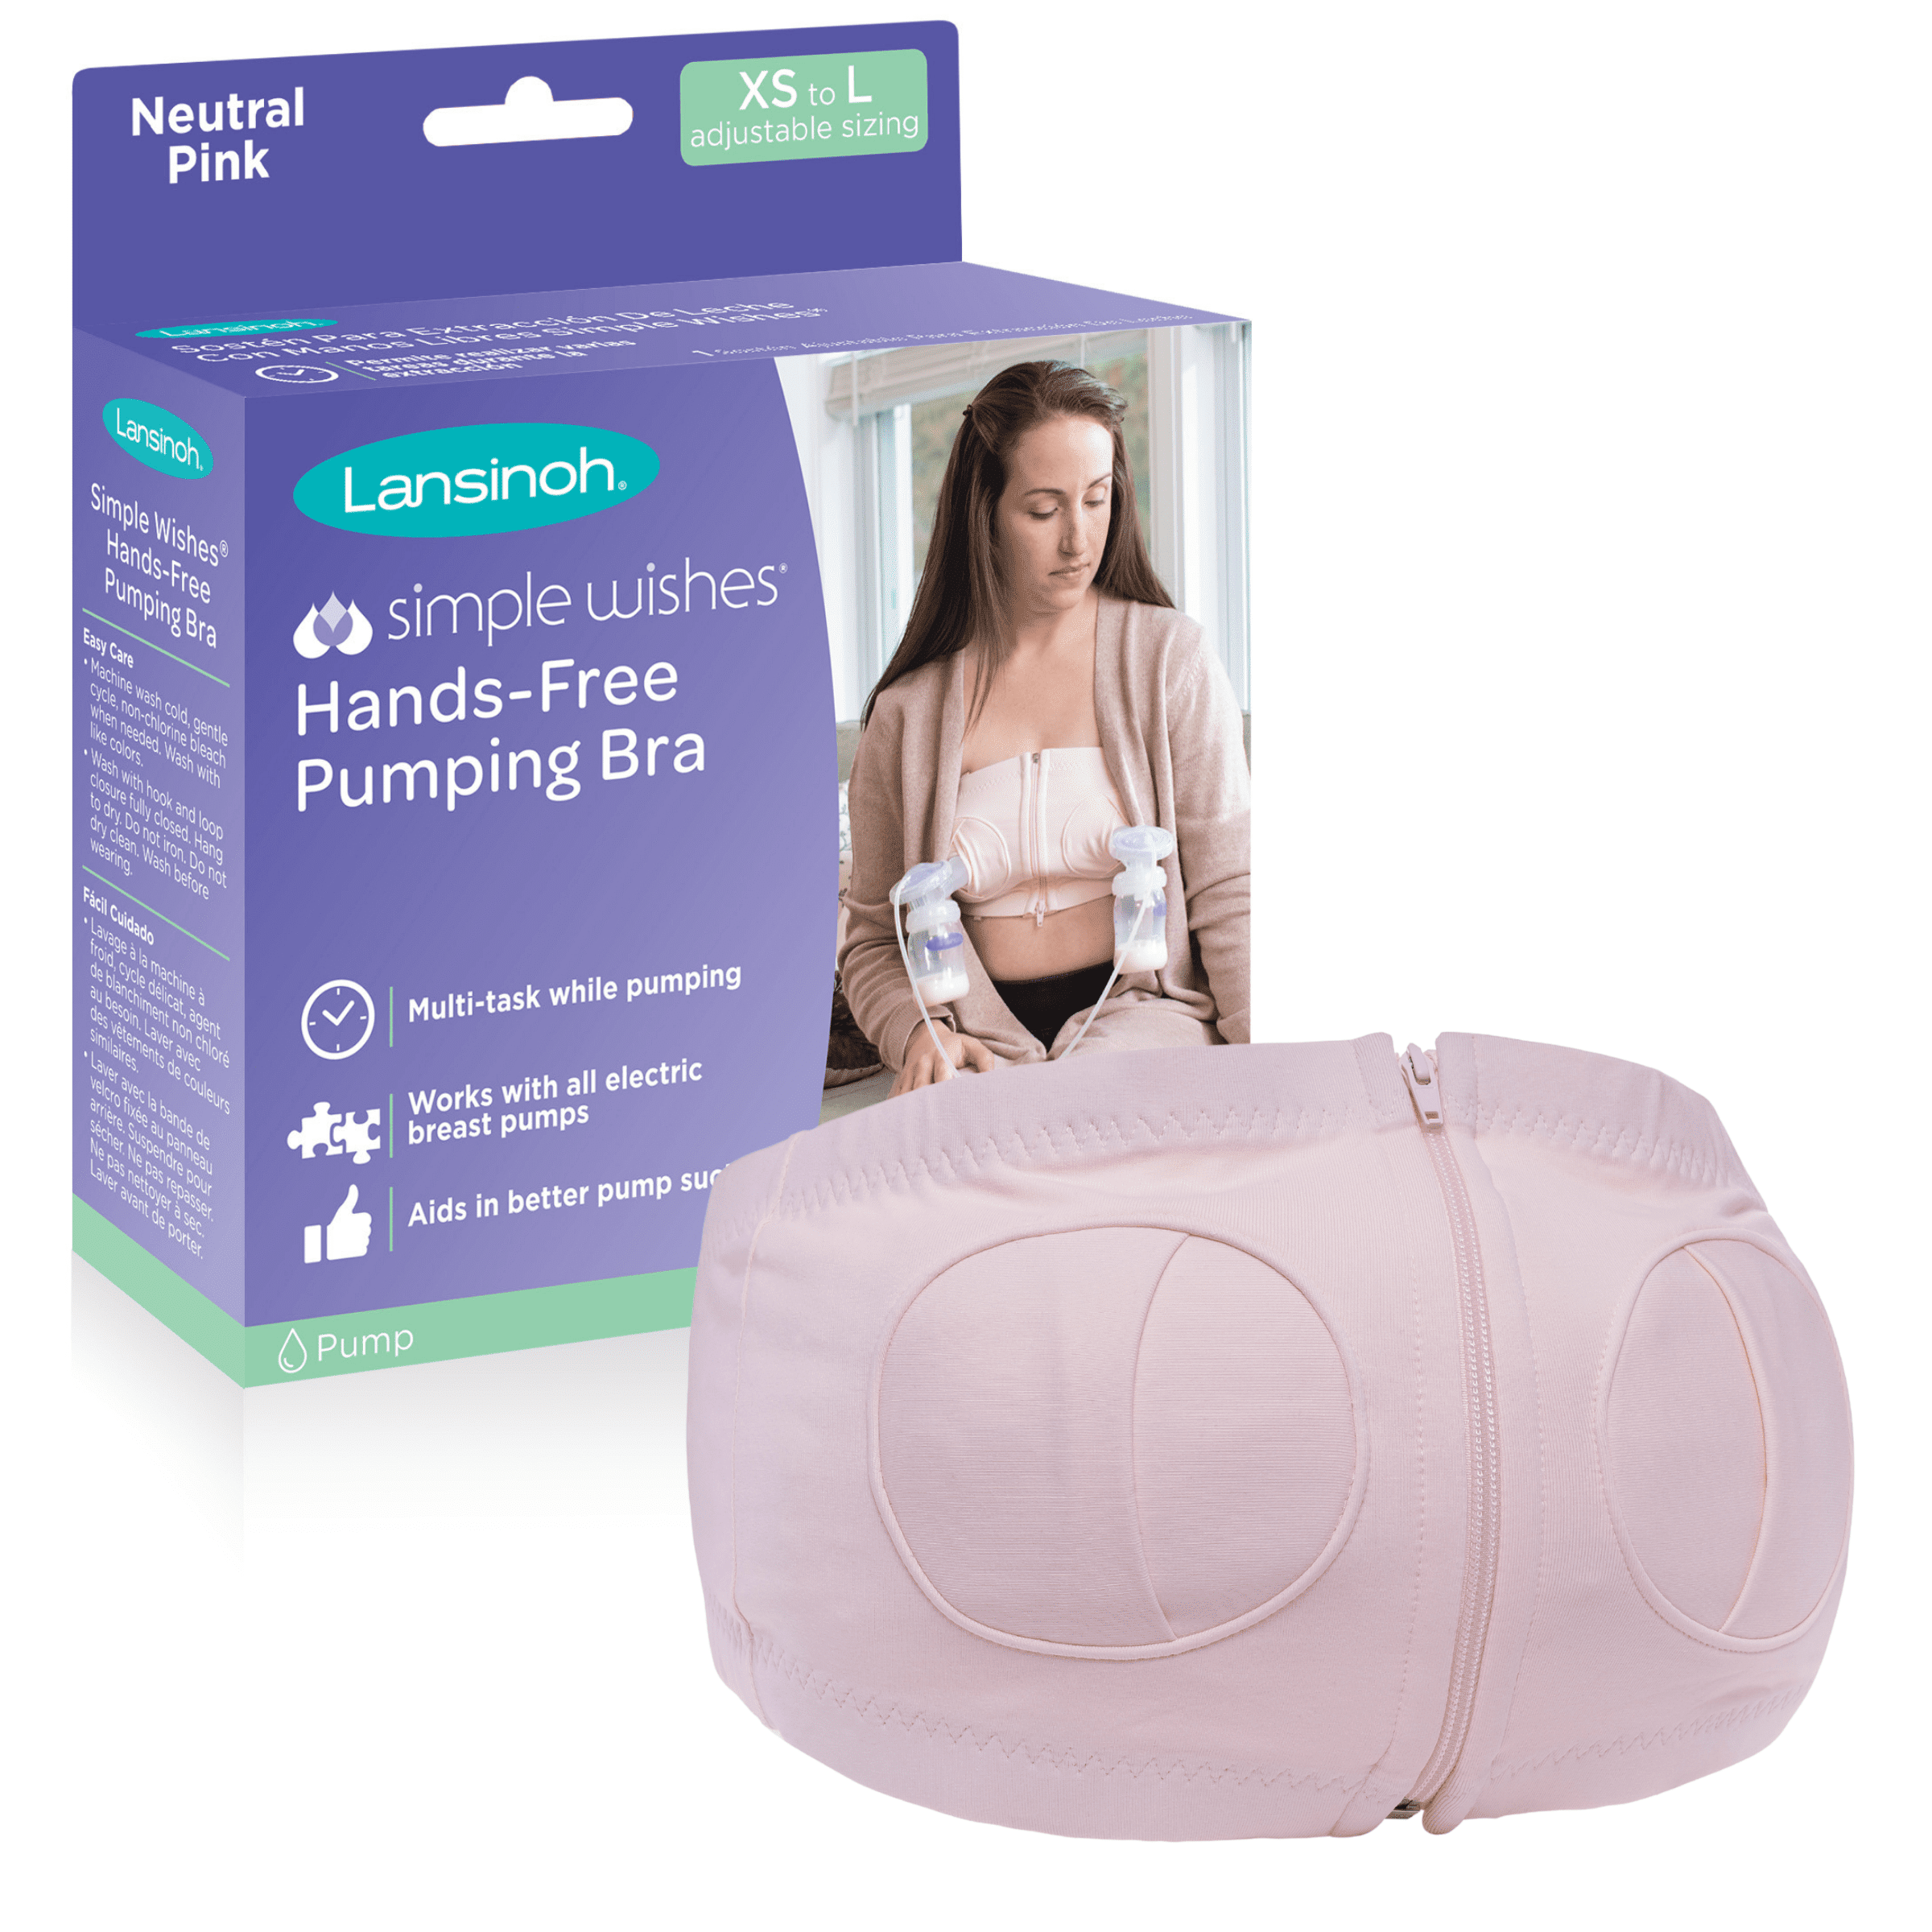  Hands Free Pumping Bra, Comfortable Breast Pump Bra with Pads,  Lupantte Adjustable Nursing Bra for Pumping .Fit Most Breast Pumps Like  Spectra, Lansinoh, Philips Avent etc. (Large) Skin : Clothing, Shoes